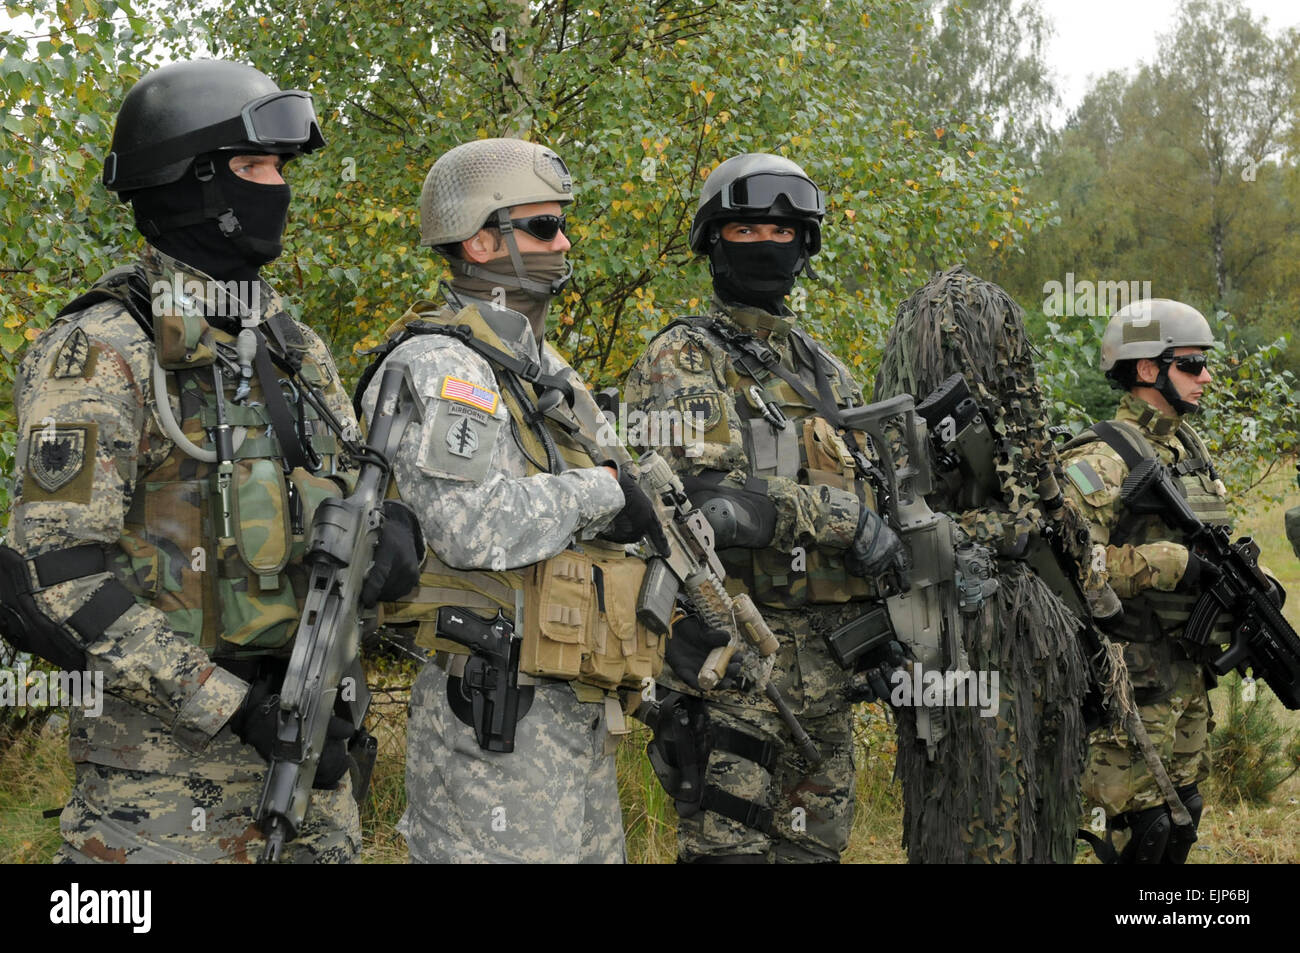 Special Operations Forces operators representing Croatia first and third from left, the U.S. second from left and Poland first and second from right, wear a variety of gear on Sept. 20 at Drawksow Pomorskie, Poland during a press conference as part of the official start of the Jackal Stone 10 exercise. Jackal Stone 10, hosted by Poland and Lithuania this year, is an annual international special operations forces SOF exercise held in Europe. Its objective is to enhance capabilities and interoperability amongst the participating special operations forces and as well as build mutual respect while Stock Photo